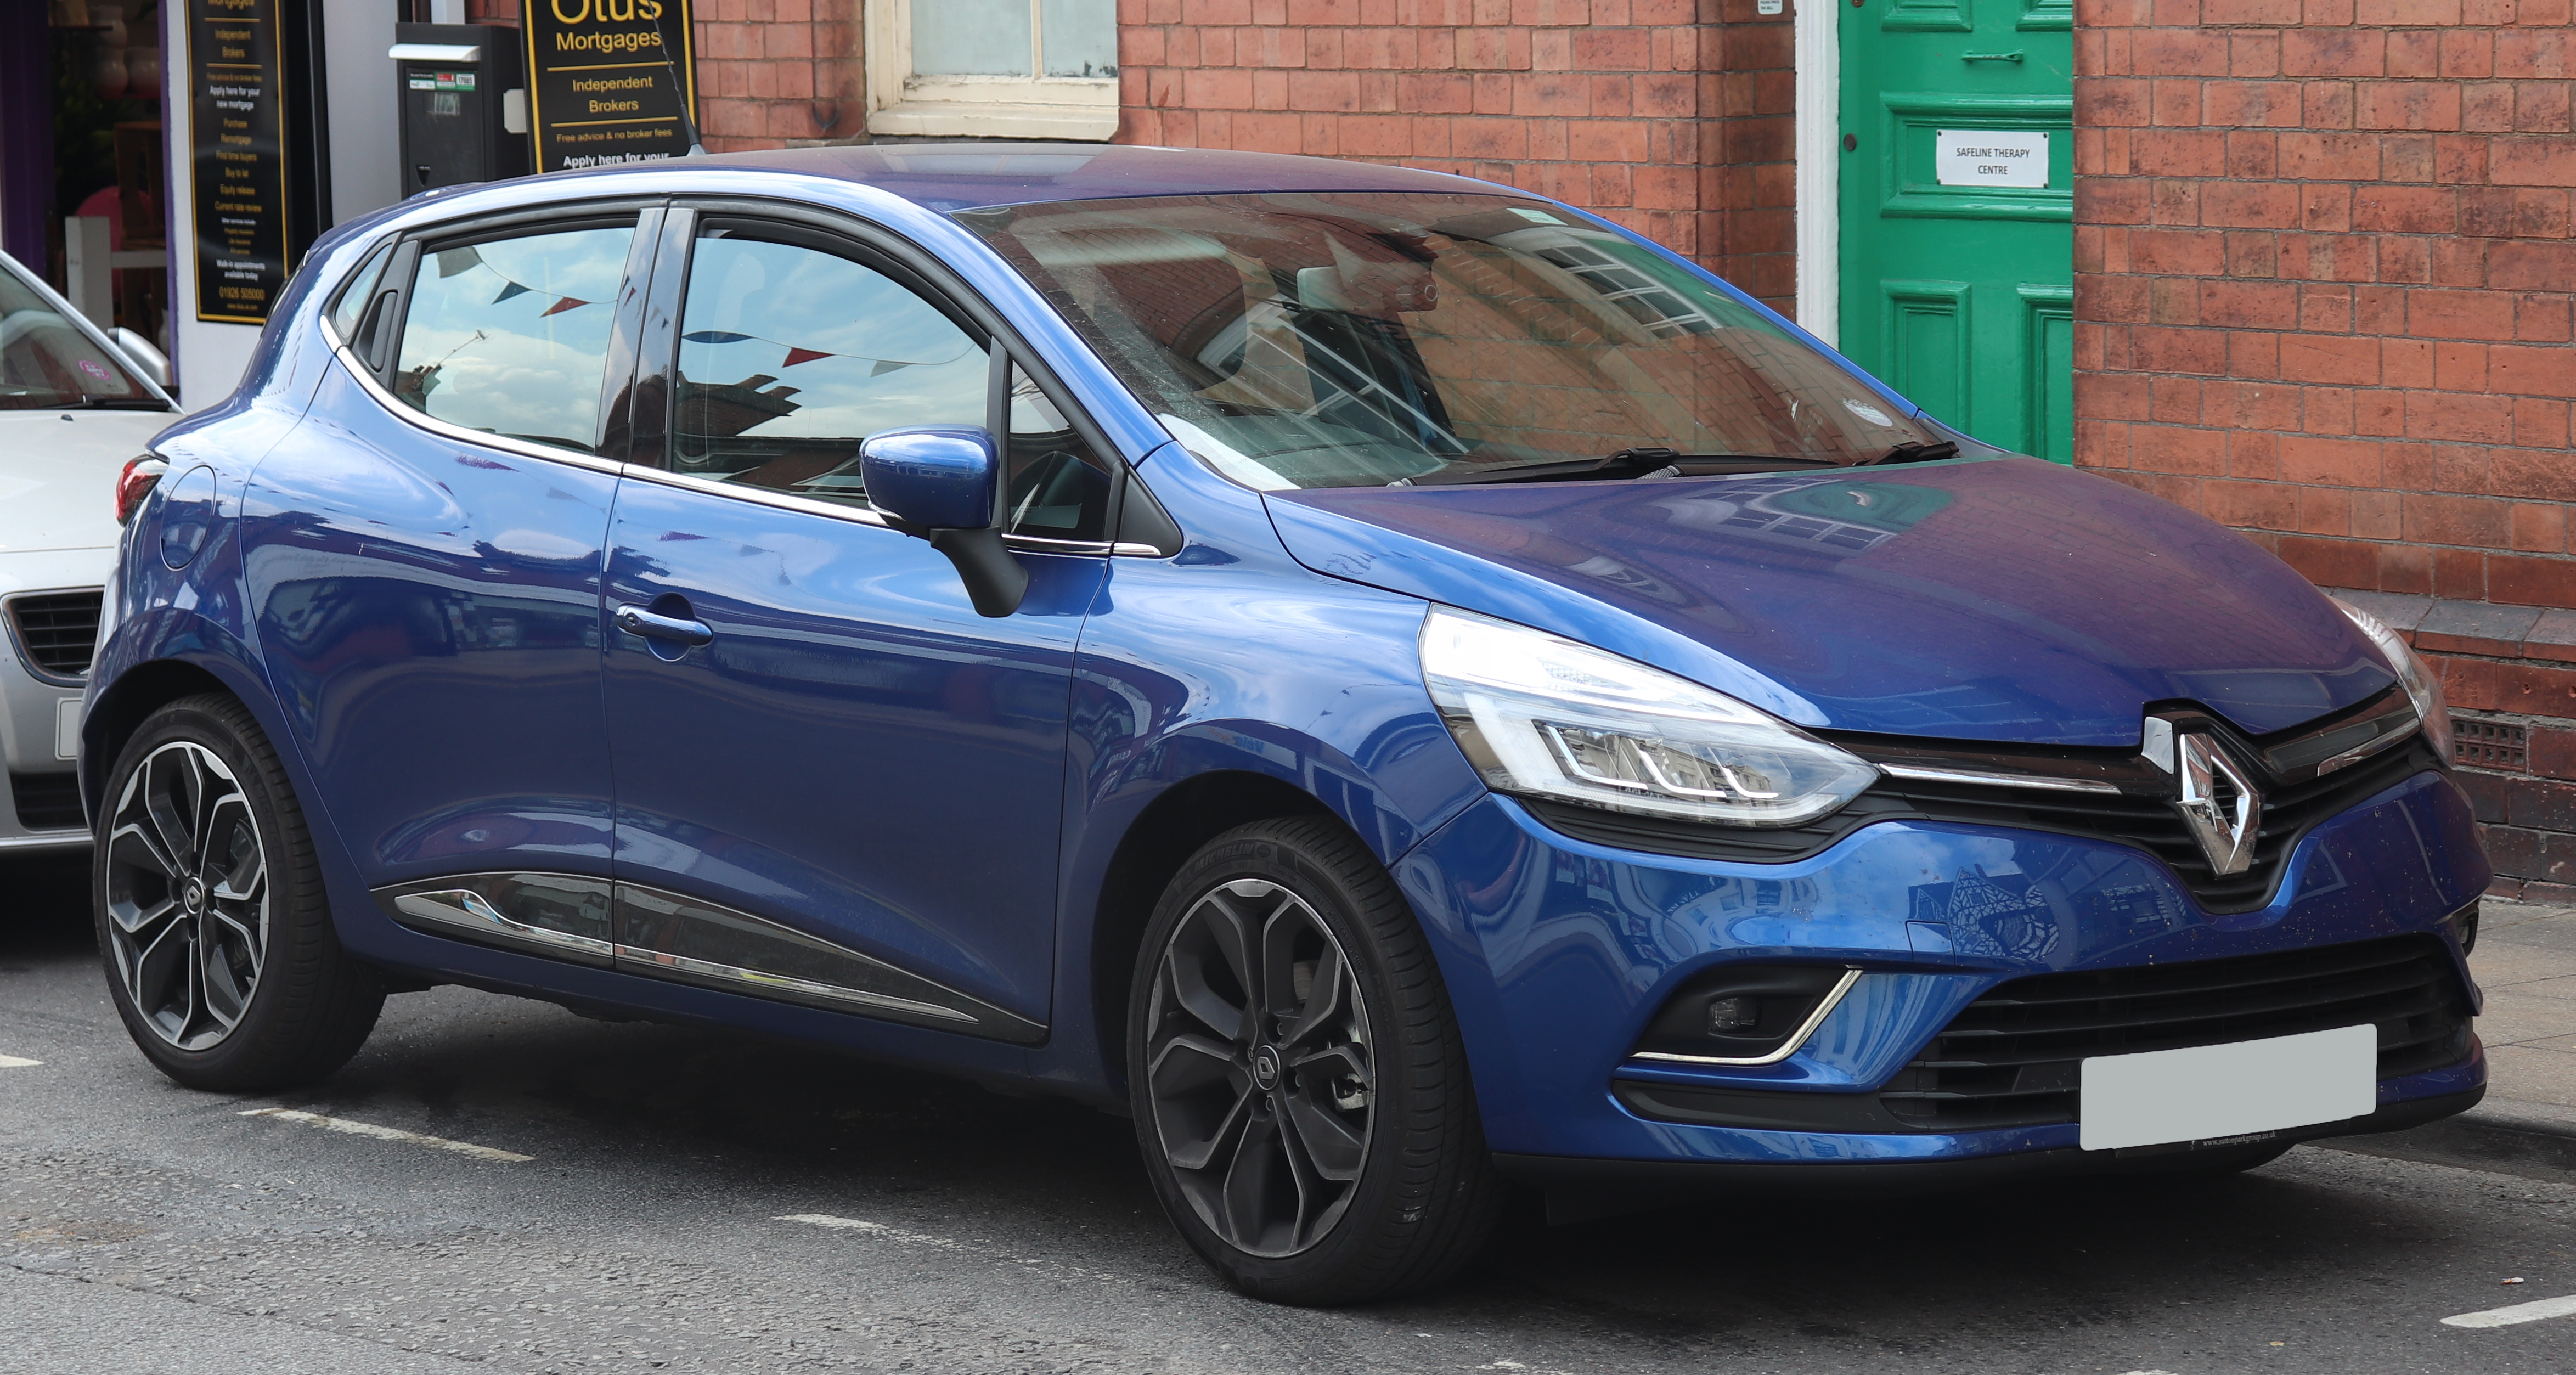 Renault Clio hatchback specifications